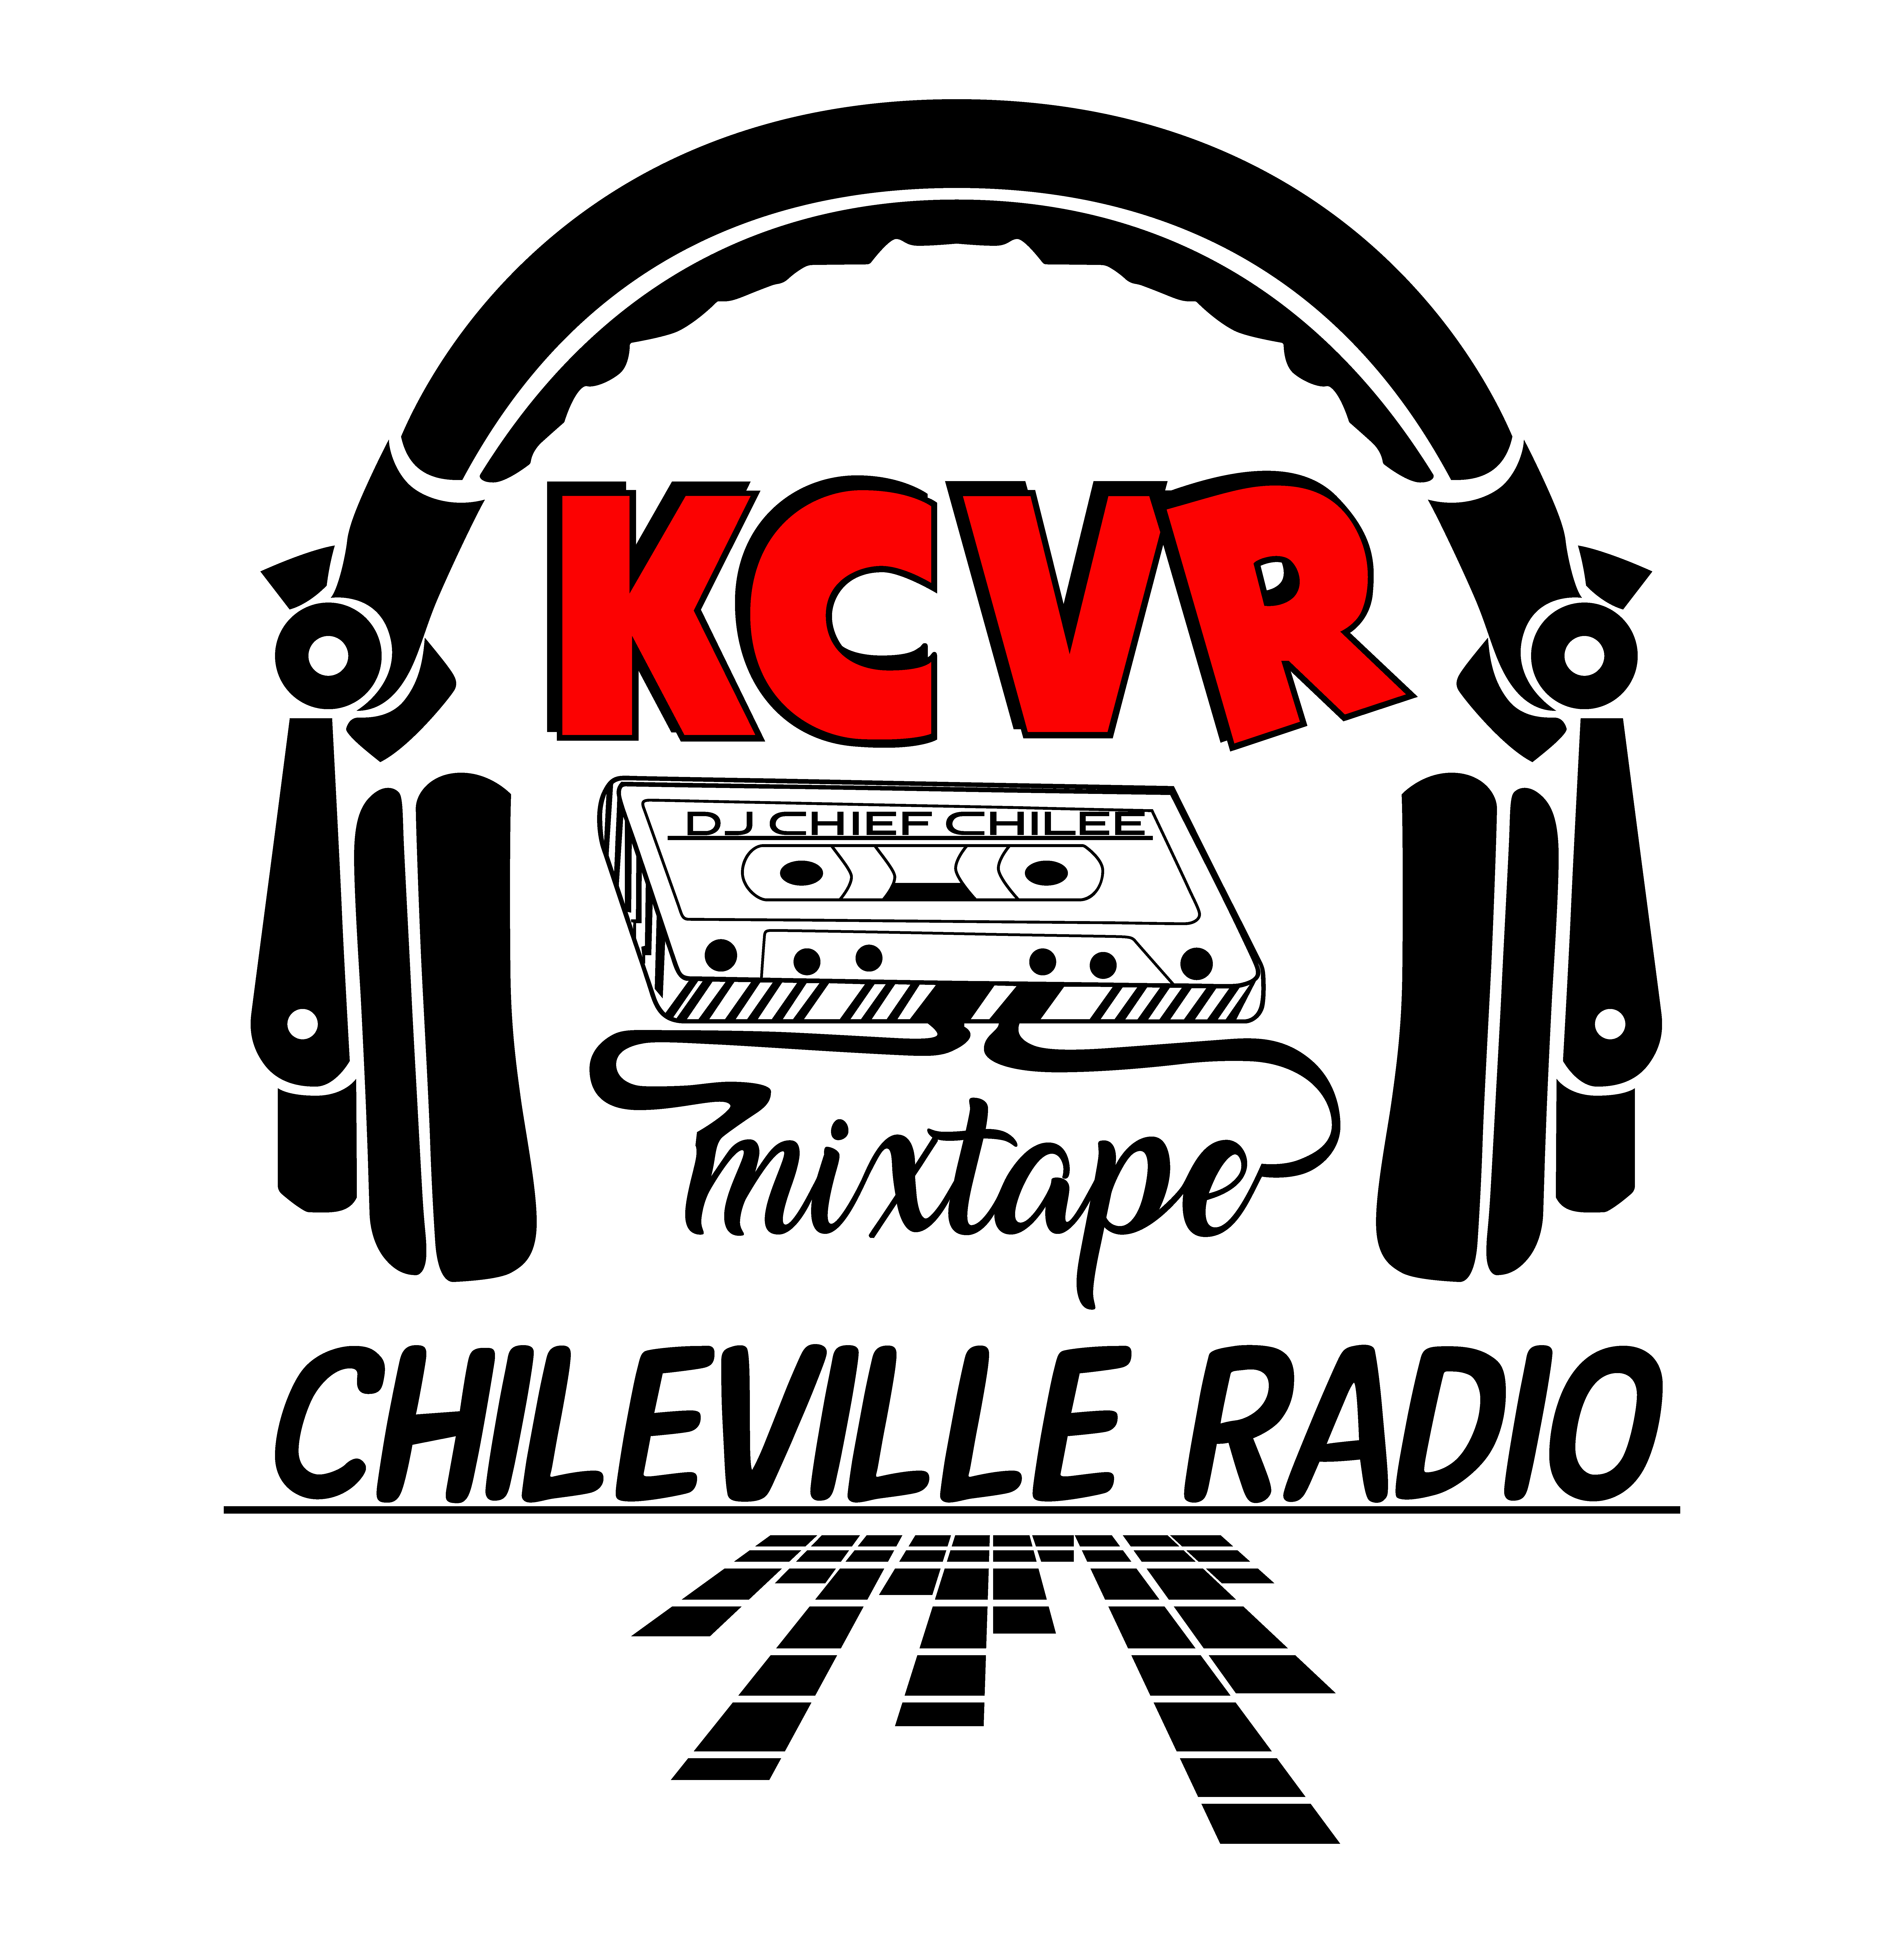 Art for KCVR ID Station  by DJ Chief Chilee